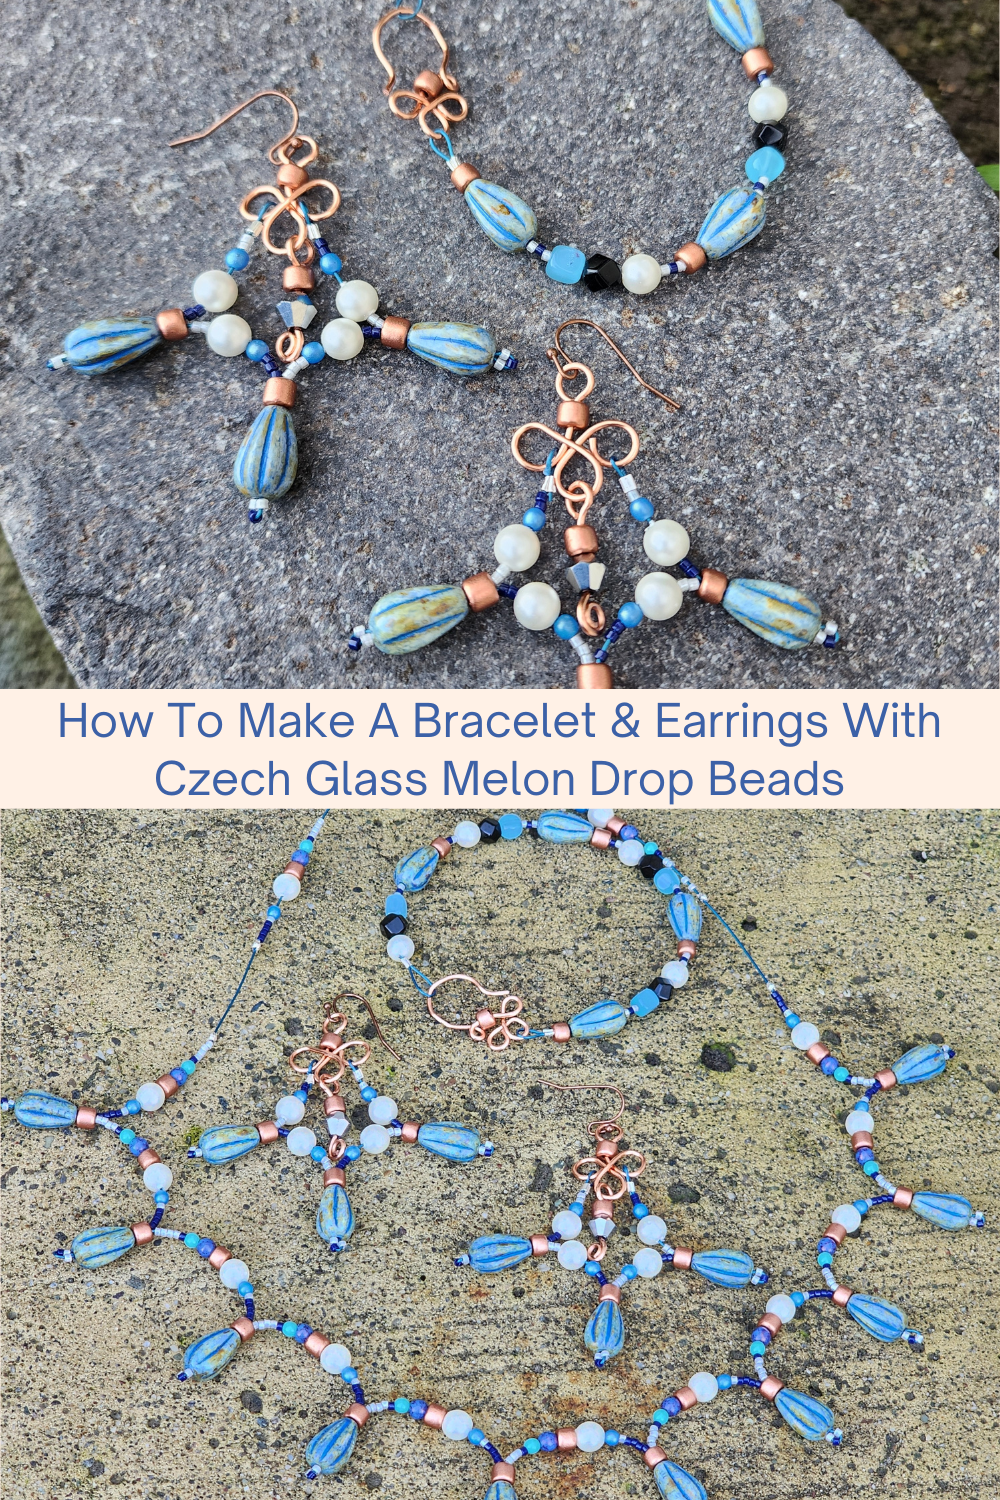 How To Make A Bracelet & Earrings With Czech Glass Melon Drop Beads Collage